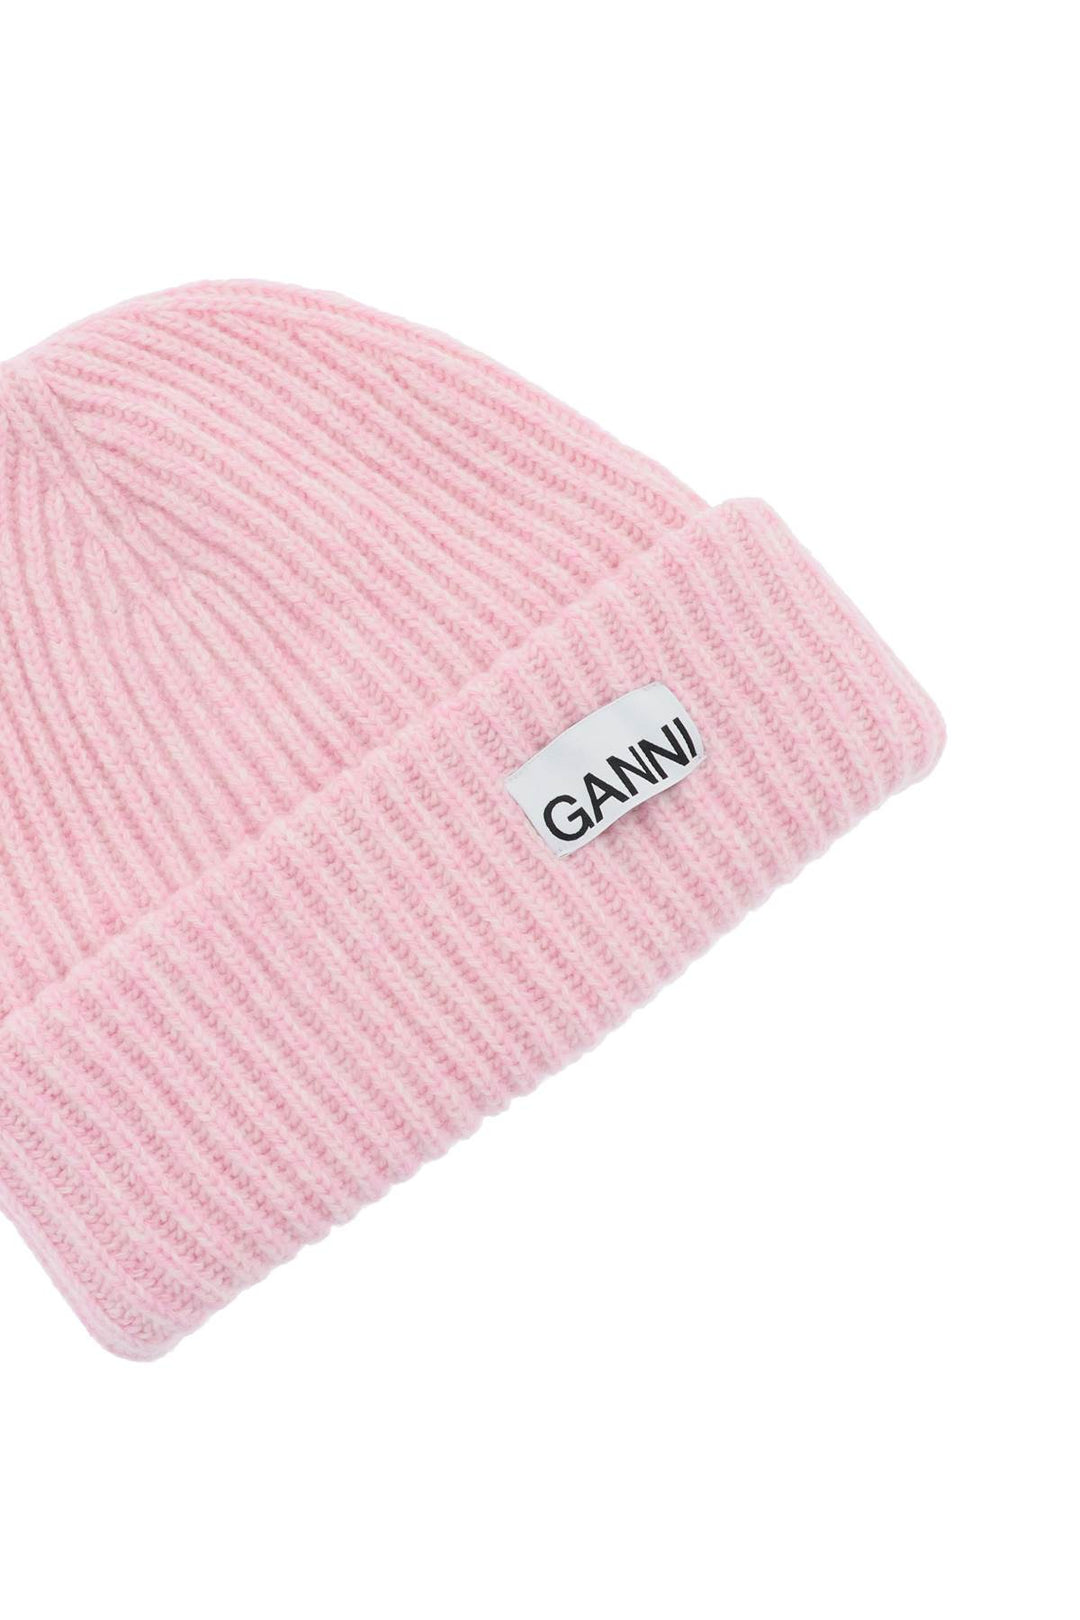 Ganni Beanie Hat With Logo Patch   Pink